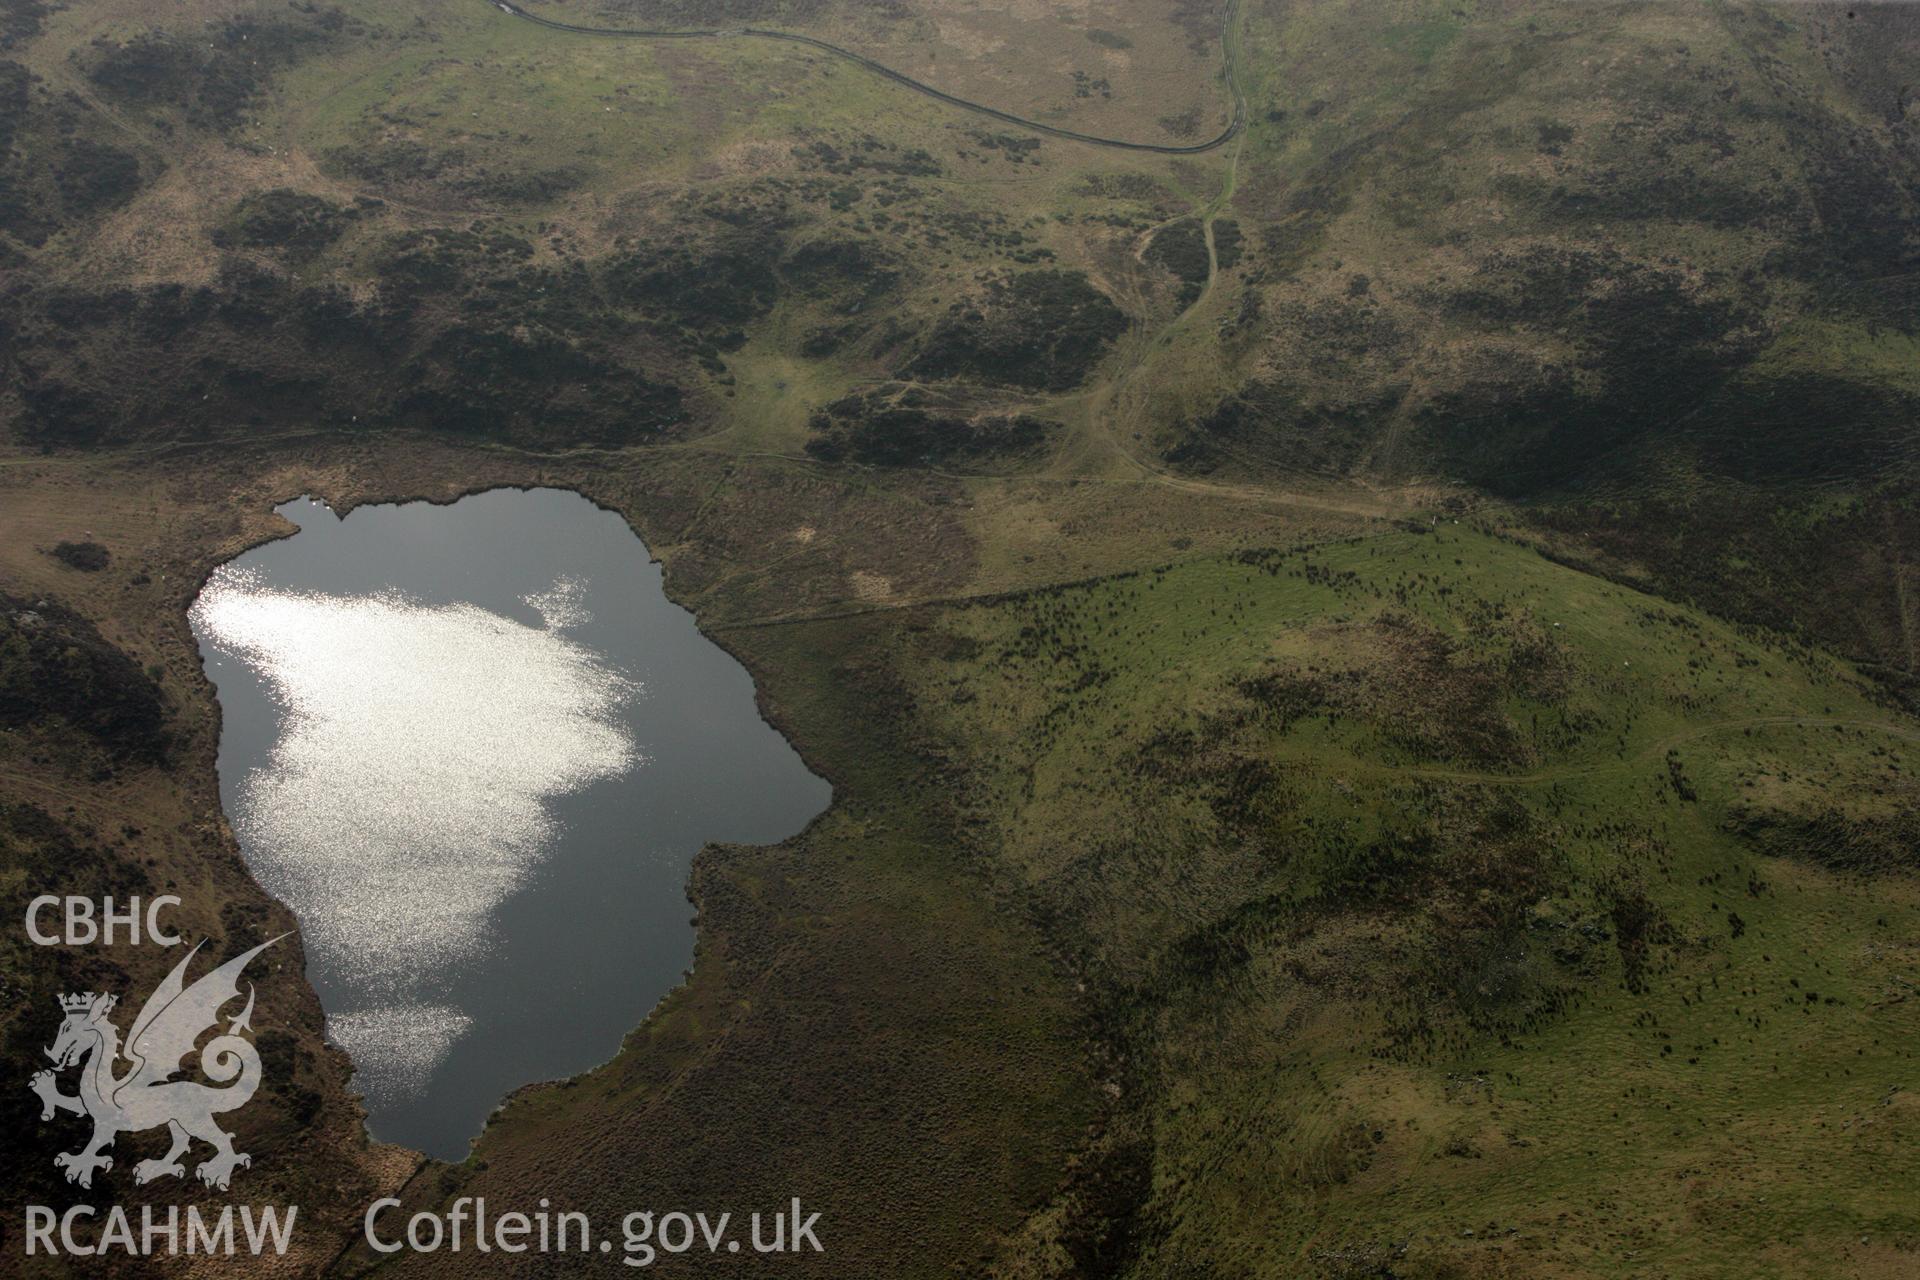 RCAHMW colour oblique photograph of Llyn Barfog. Taken by Toby Driver on 25/03/2011.